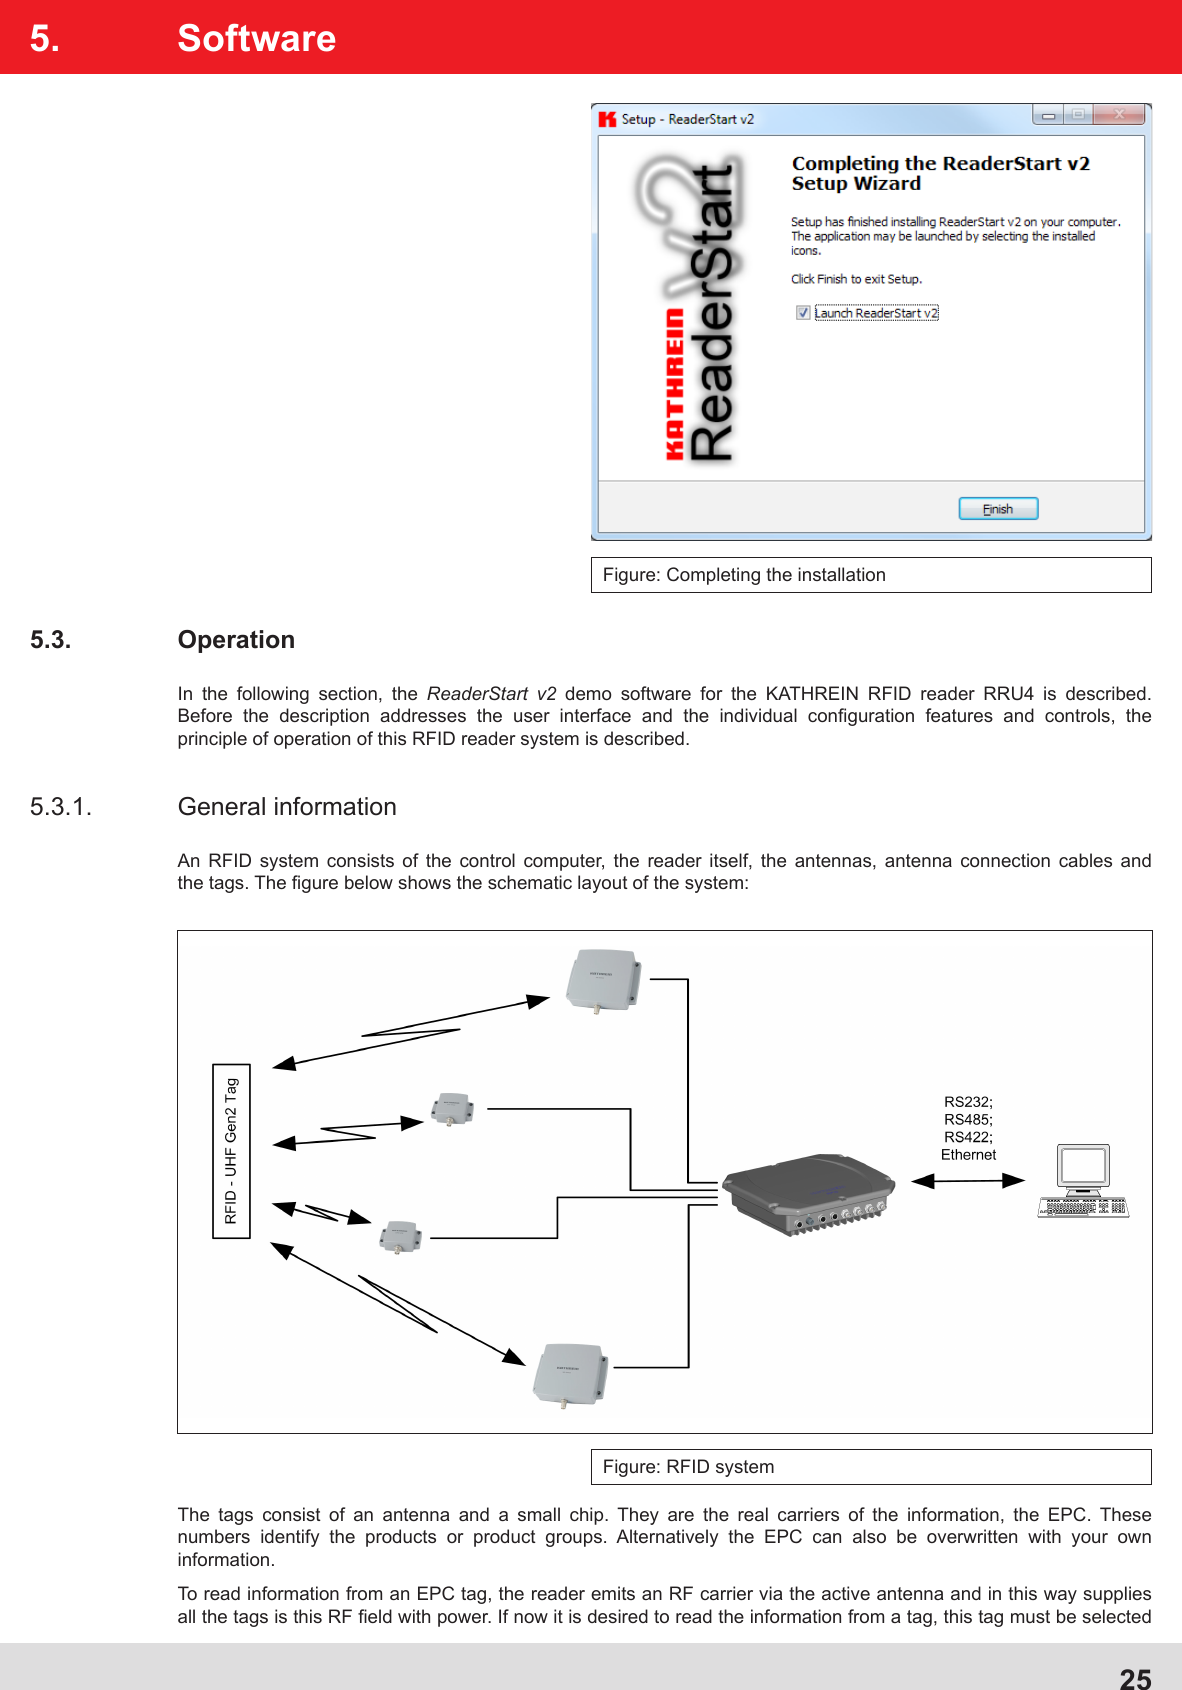 25Figure: Completing the installation5. Software5.3. OperationIn the following section, the ReaderStart v2 demo software for the KATHREIN RFID reader RRU4 is described. Before the description addresses the user interface and the individual conﬁ guration features and controls, the principle of operation of this RFID reader system is described.5.3.1. General informationAn RFID system consists of the control computer, the reader itself, the antennas, antenna connection cables and the tags. The ﬁ gure below shows the schematic layout of the system:Figure: RFID systemThe tags consist of an antenna and a small chip. They are the real carriers of the information, the EPC. These numbers identify the products or product groups. Alternatively the EPC can also be overwritten with your own information.To read information from an EPC tag, the reader emits an RF carrier via the active antenna and in this way supplies all the tags is this RF ﬁ eld with power. If now it is desired to read the information from a tag, this tag must be selected 